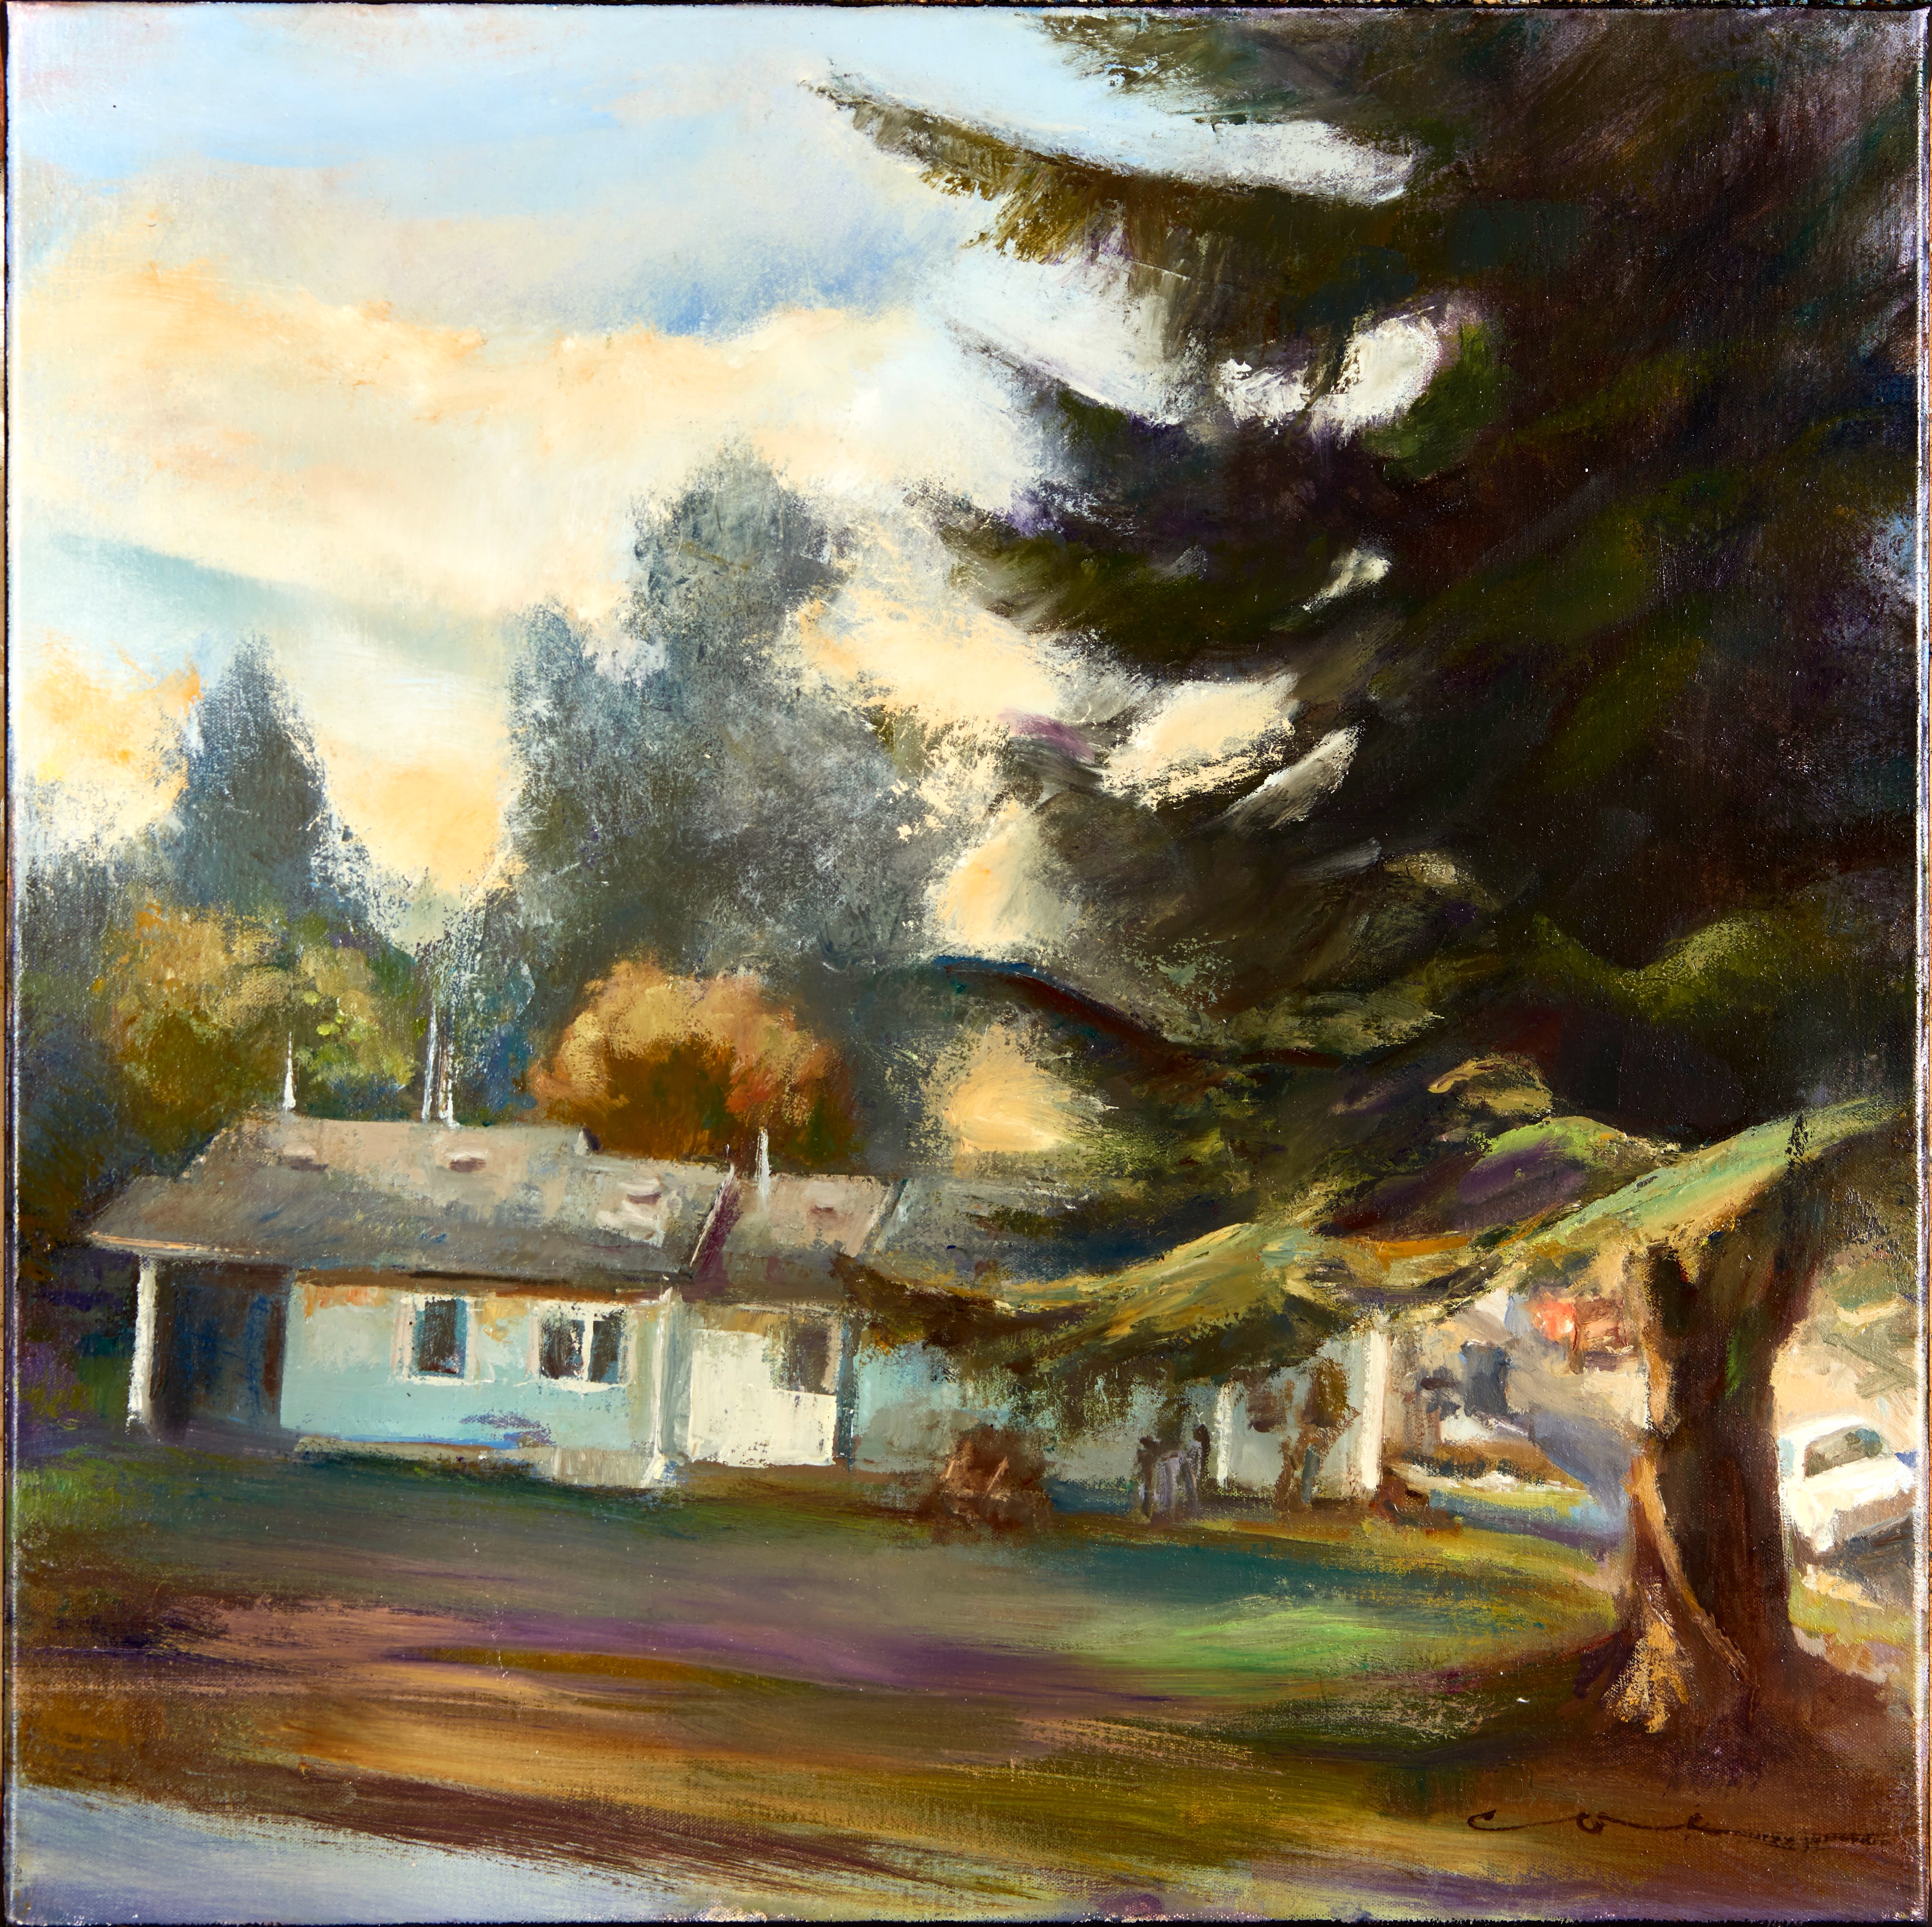 Painter Margaret Coe’s newest work is on view through Nov. 25 at the Karin Clarke Gallery